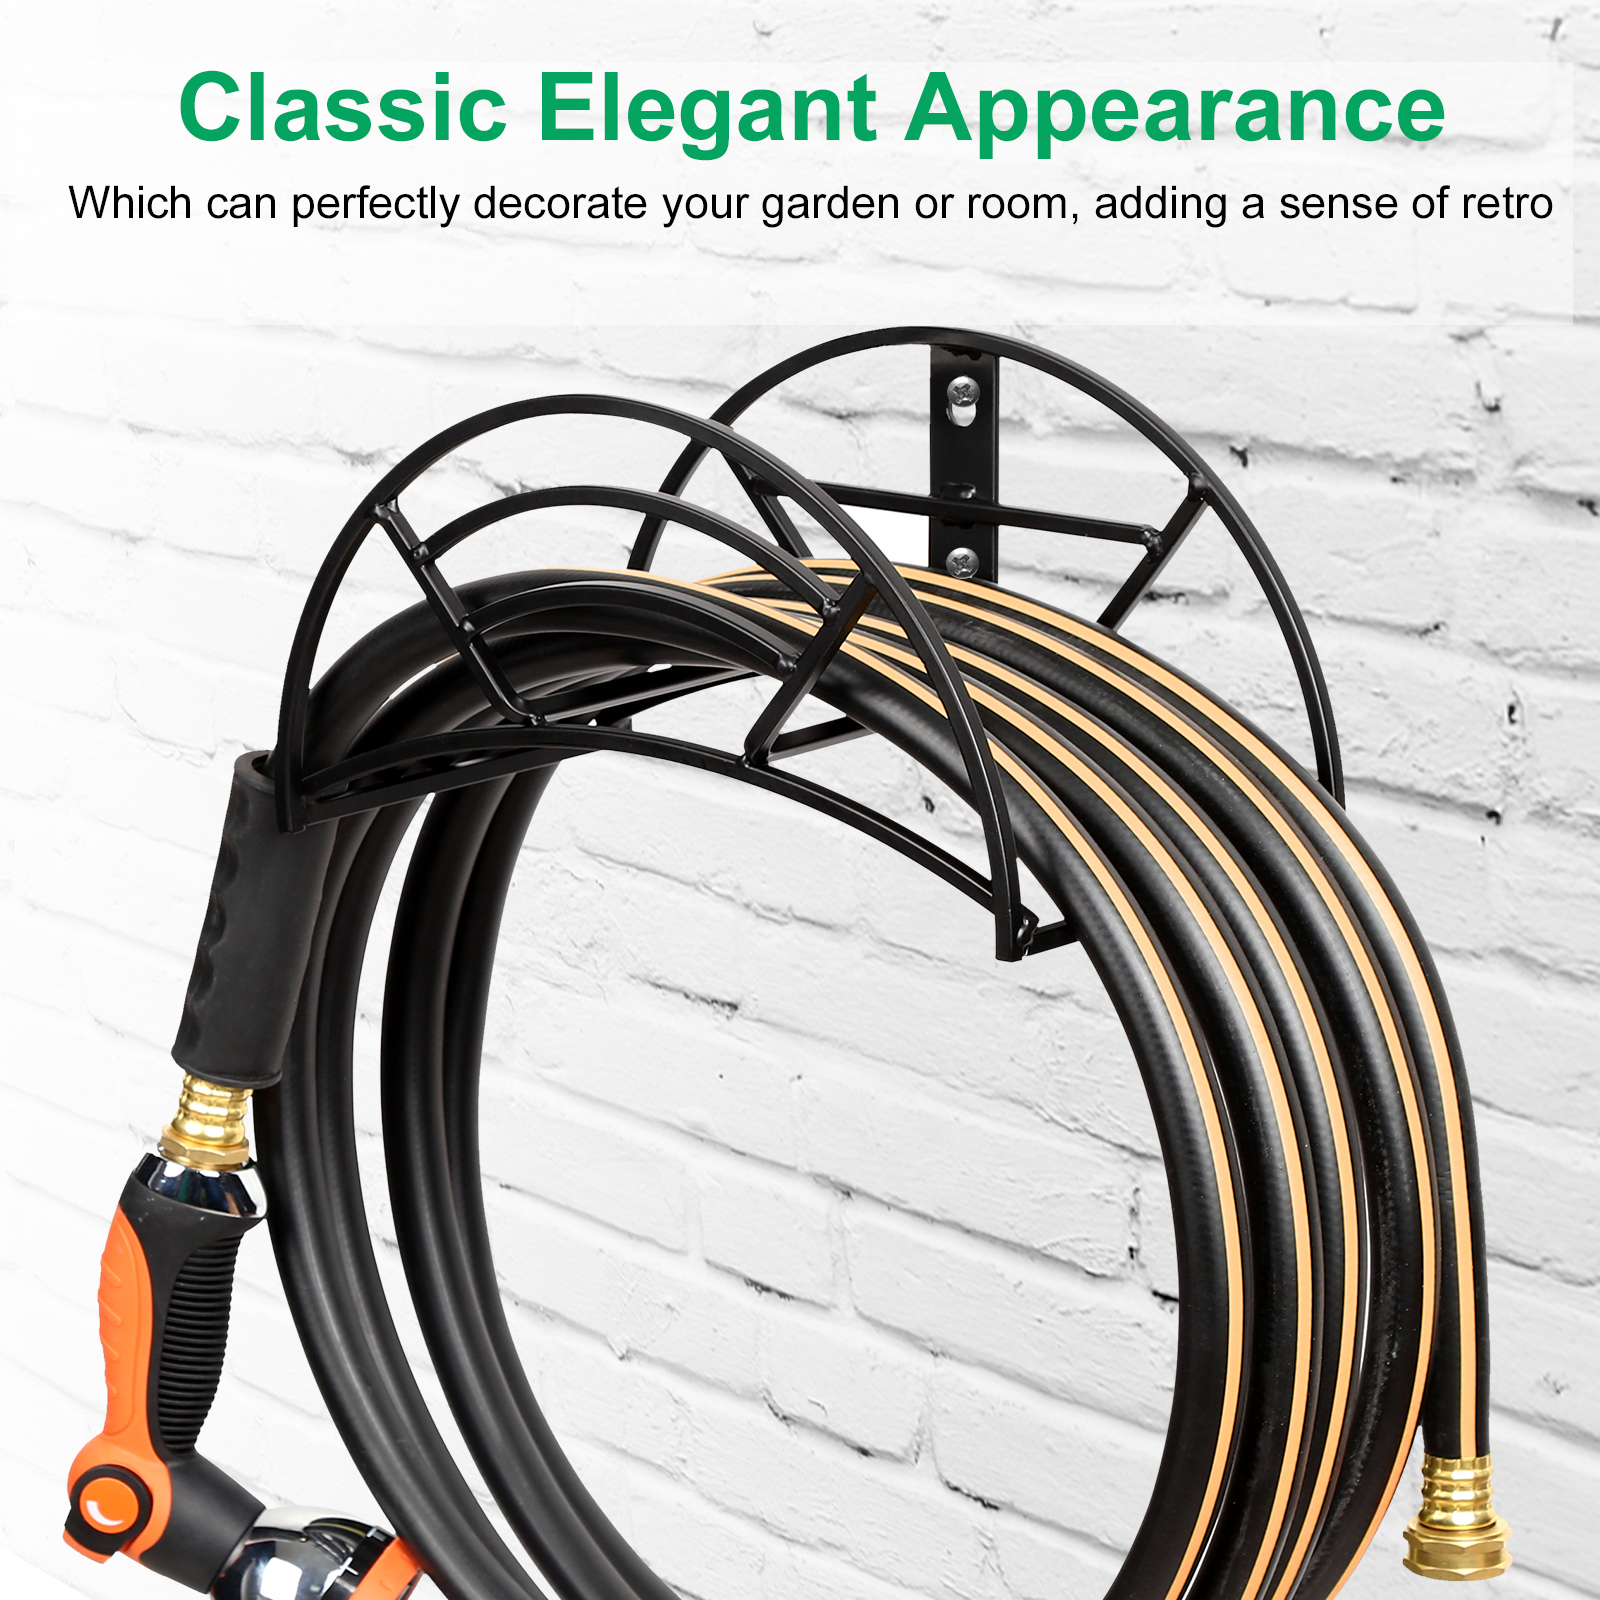 TomCare Classic Wall Mount Garden Hose Holder and Classic Free Standing Detachable Garden Hose Holder 